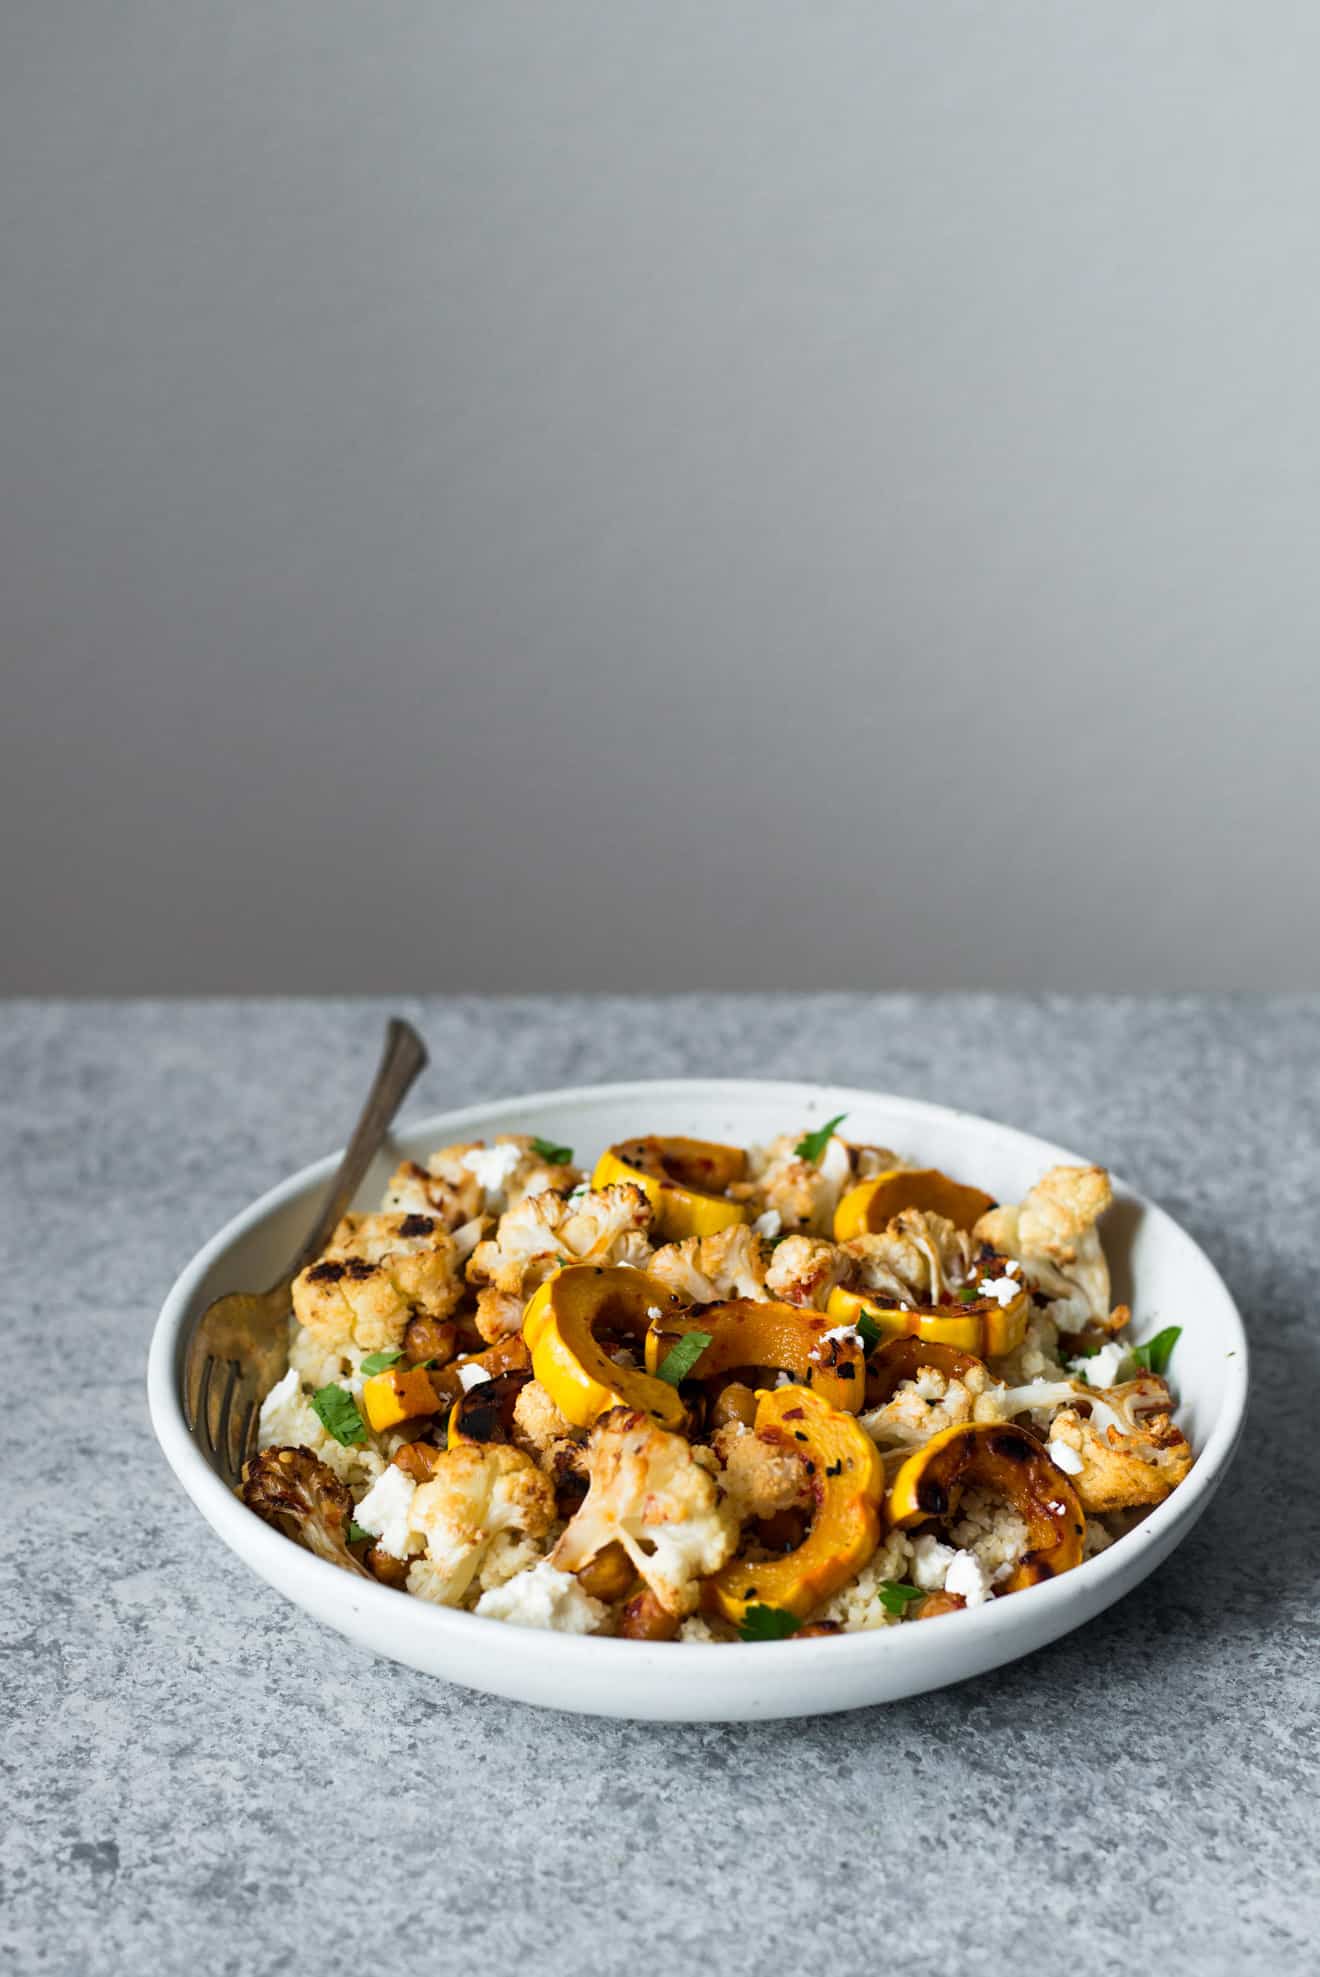 This Harissa Roasted Cauliflower with Delicata Squash & Chickpeas is a healthy, gluten-free weeknight dinner! Made with just 7 ingredients!